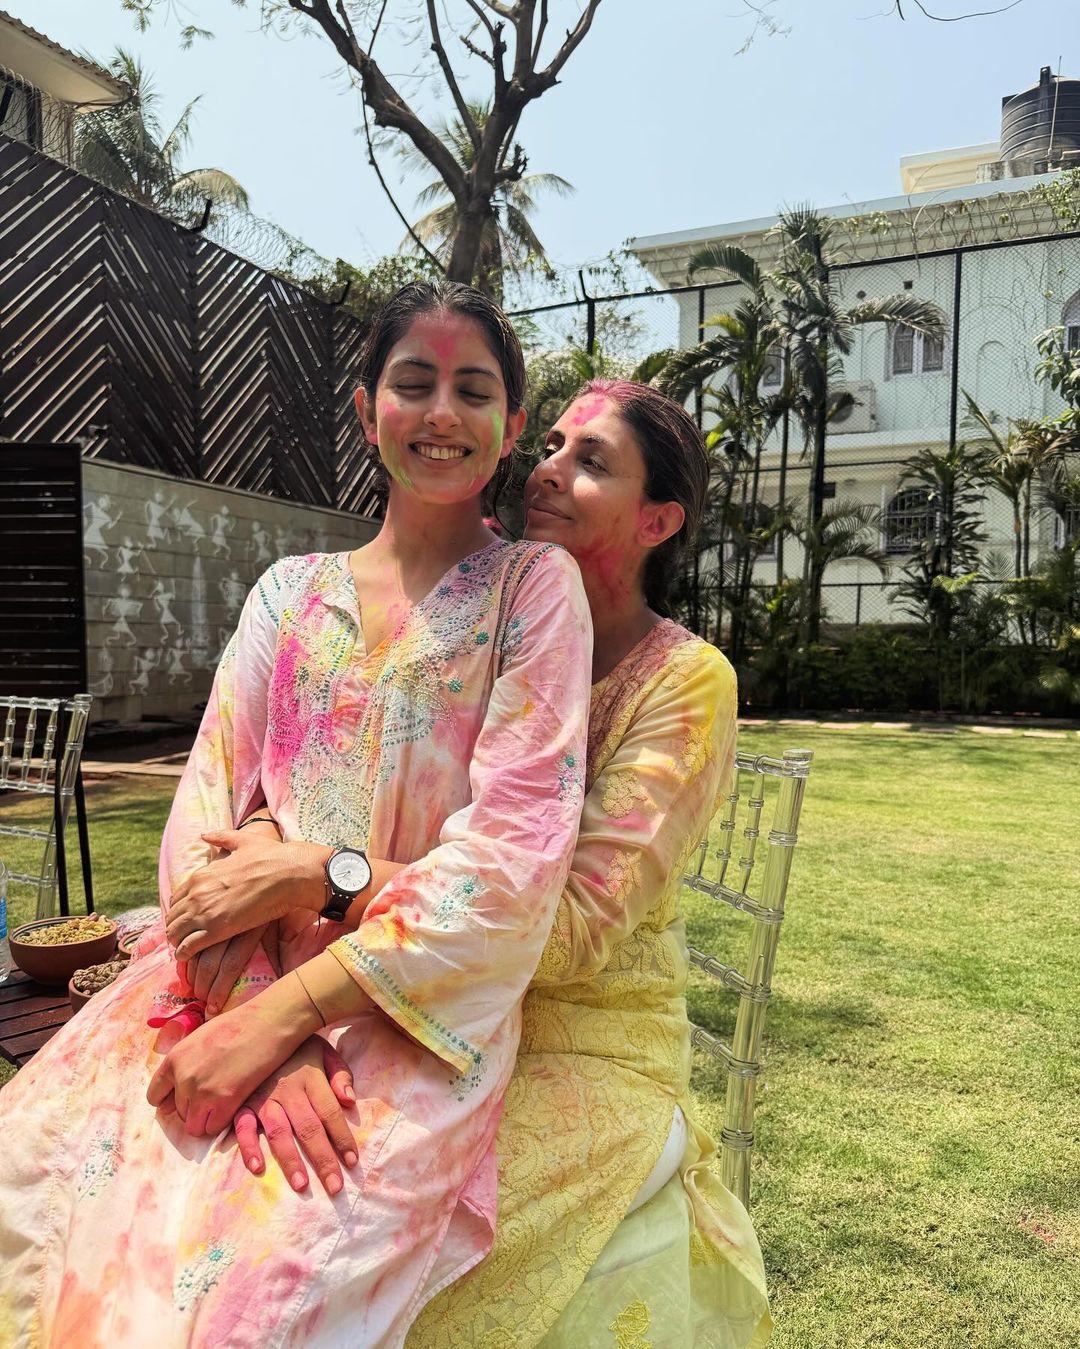 The bond between mother and daughter is the purest of all. Shweta Bachchan and Navya Naveli Nanda's picture from their Holi celebration is proof of that